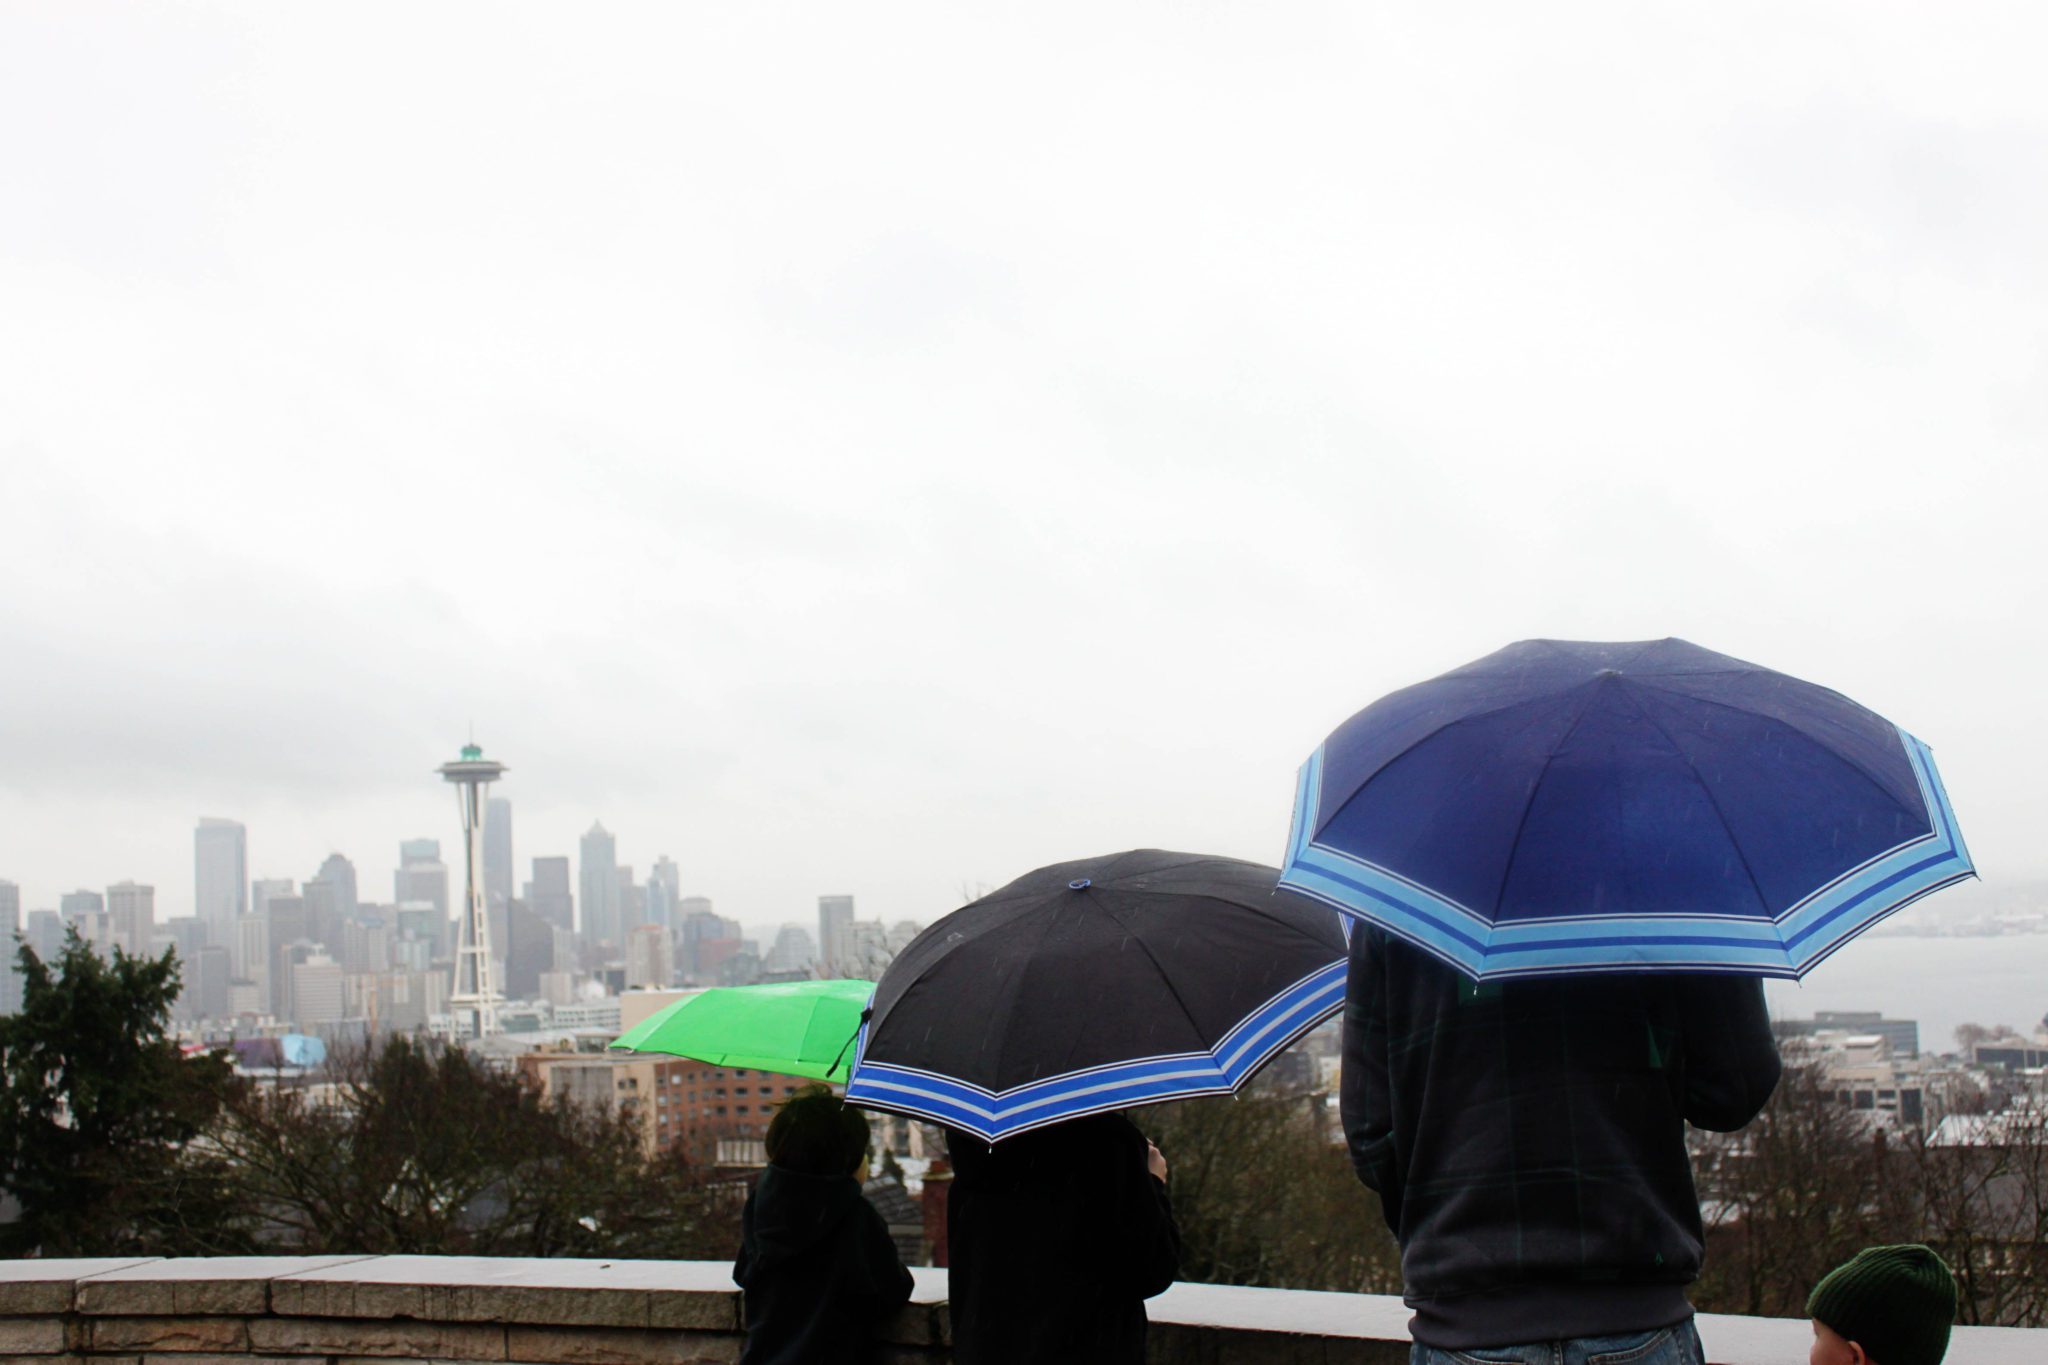 Kerry Park is the best places to go for scenic views of the Seattle skyline- 10 things to do in Seattle with kids #Seattle #washington #kerrypark